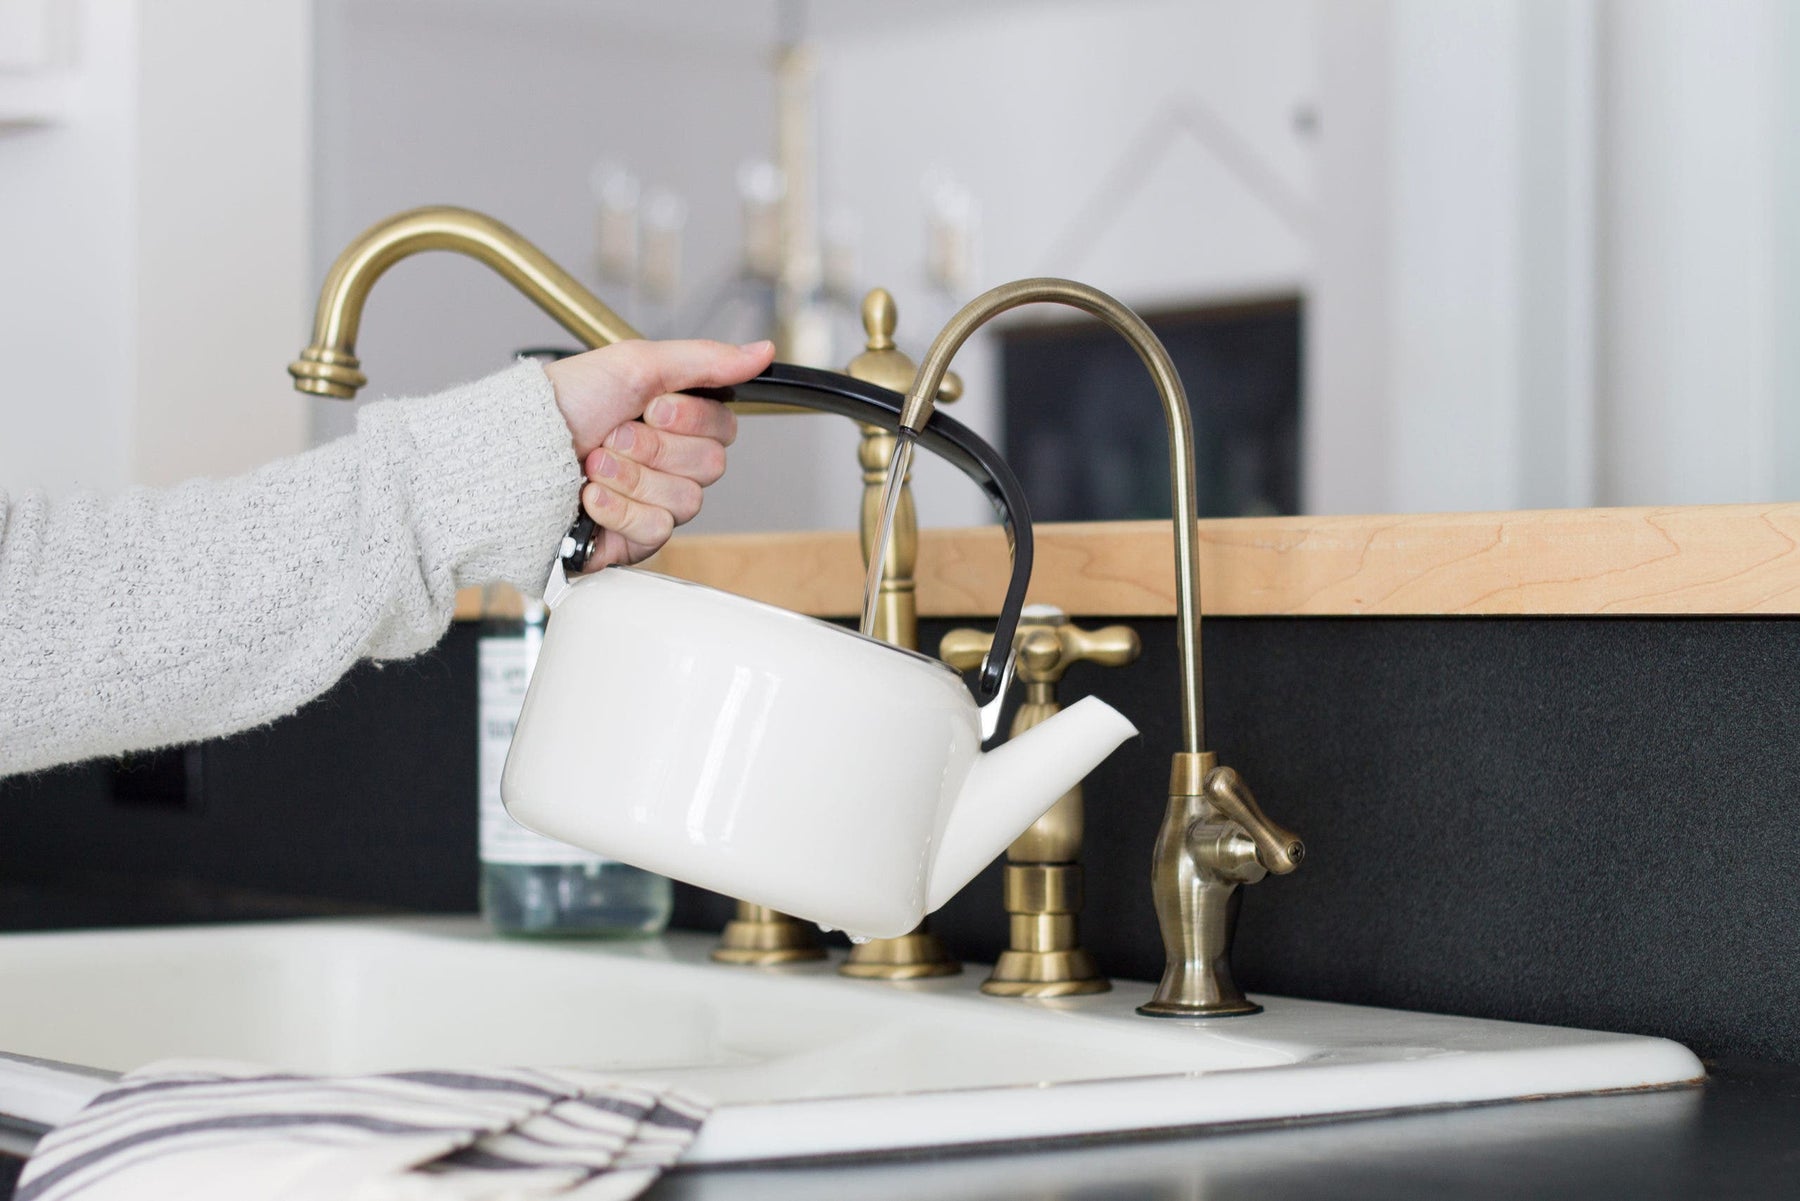 Do You Need a Water Filtration Faucet?